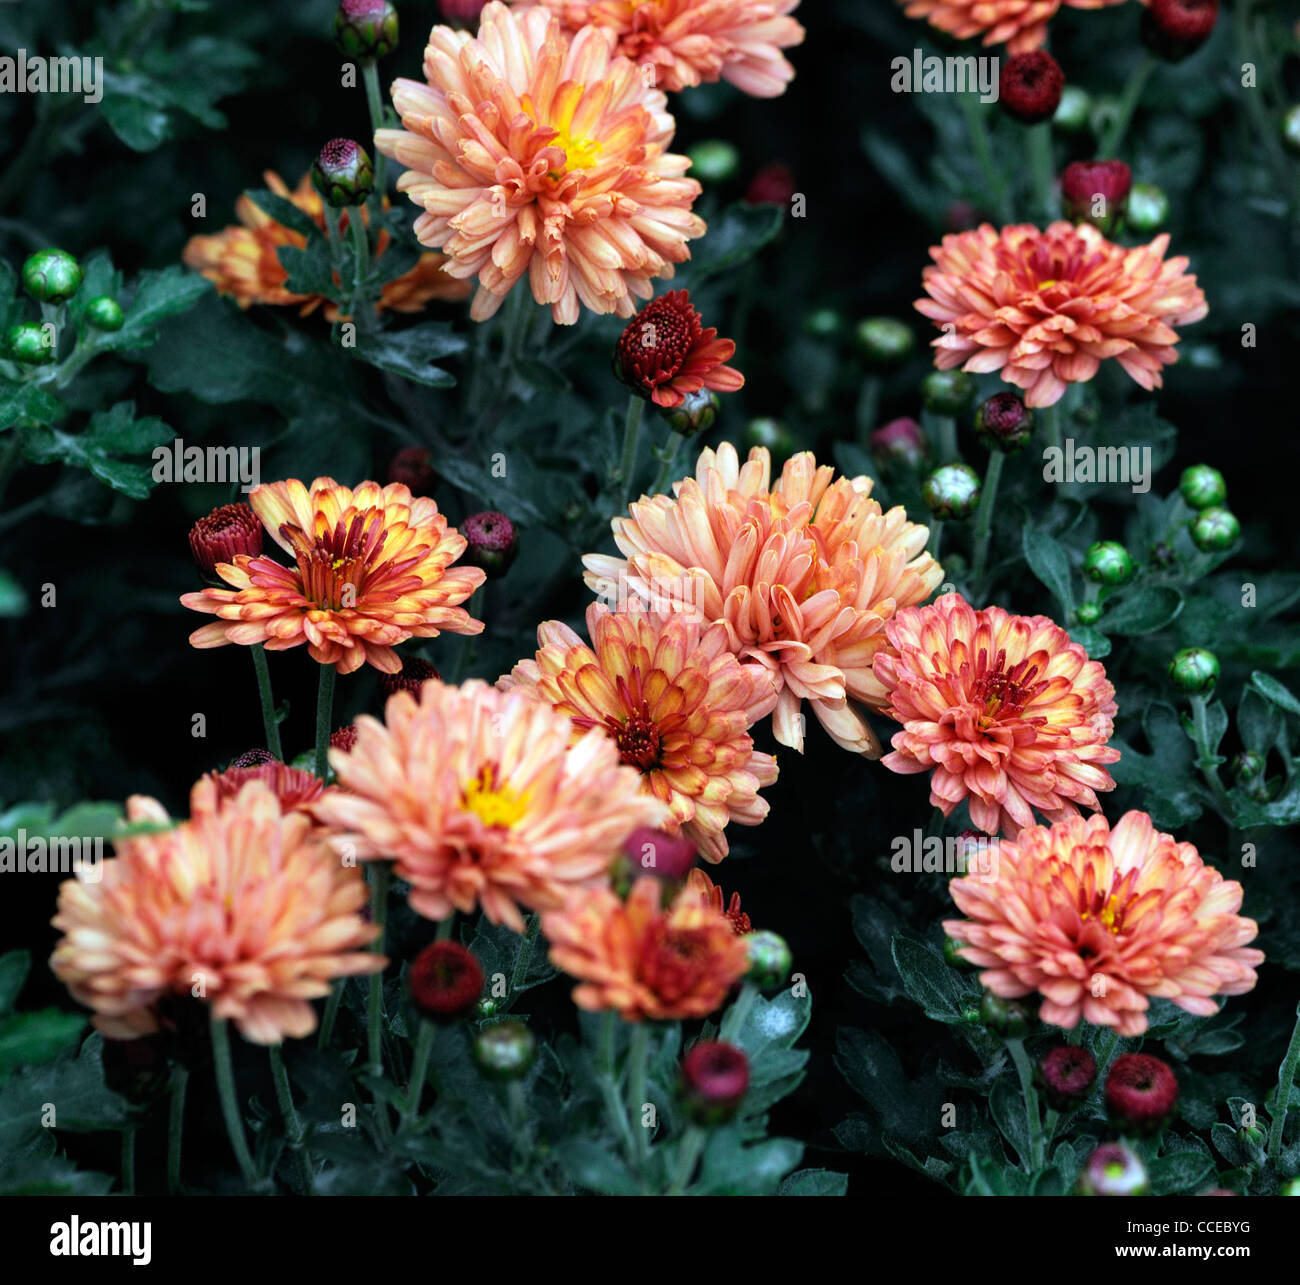 Chrysanthemum bronze elegance amber peach flowers blooms blossoms half hardy perennial herbaceous plant flower bloom blossom Stock Photo